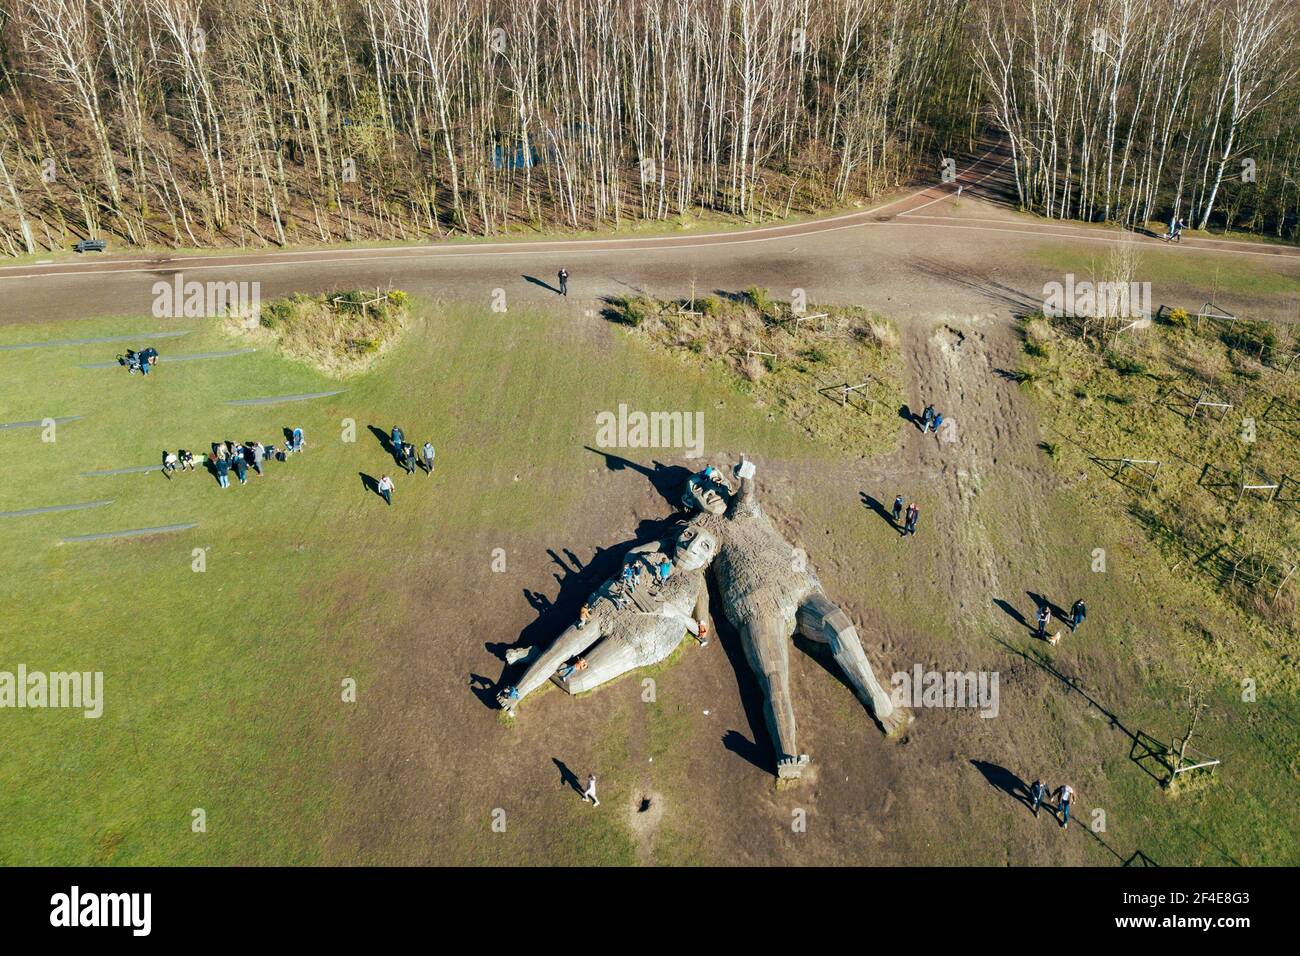 (210321) -- BOOM, March 21, 2021 (Xinhua) -- Aerial photo taken on March 20, 2021 shows people viewing two 'trolls' at the De Schorre forest park in Boom, Belgium. Danish artist Thomas Dambo and his team built seven giant 'trolls' from reclaimed wood at the De Schorre forest park in northern Belgium in 2019. These giant wooden sculptures are dotted around the forest. The United Nations General Assembly proclaimed March 21 as the International Day of Forests which celebrates and creates awareness on the importance of all types of forests and on the need to preserve and care for the world's Stock Photo